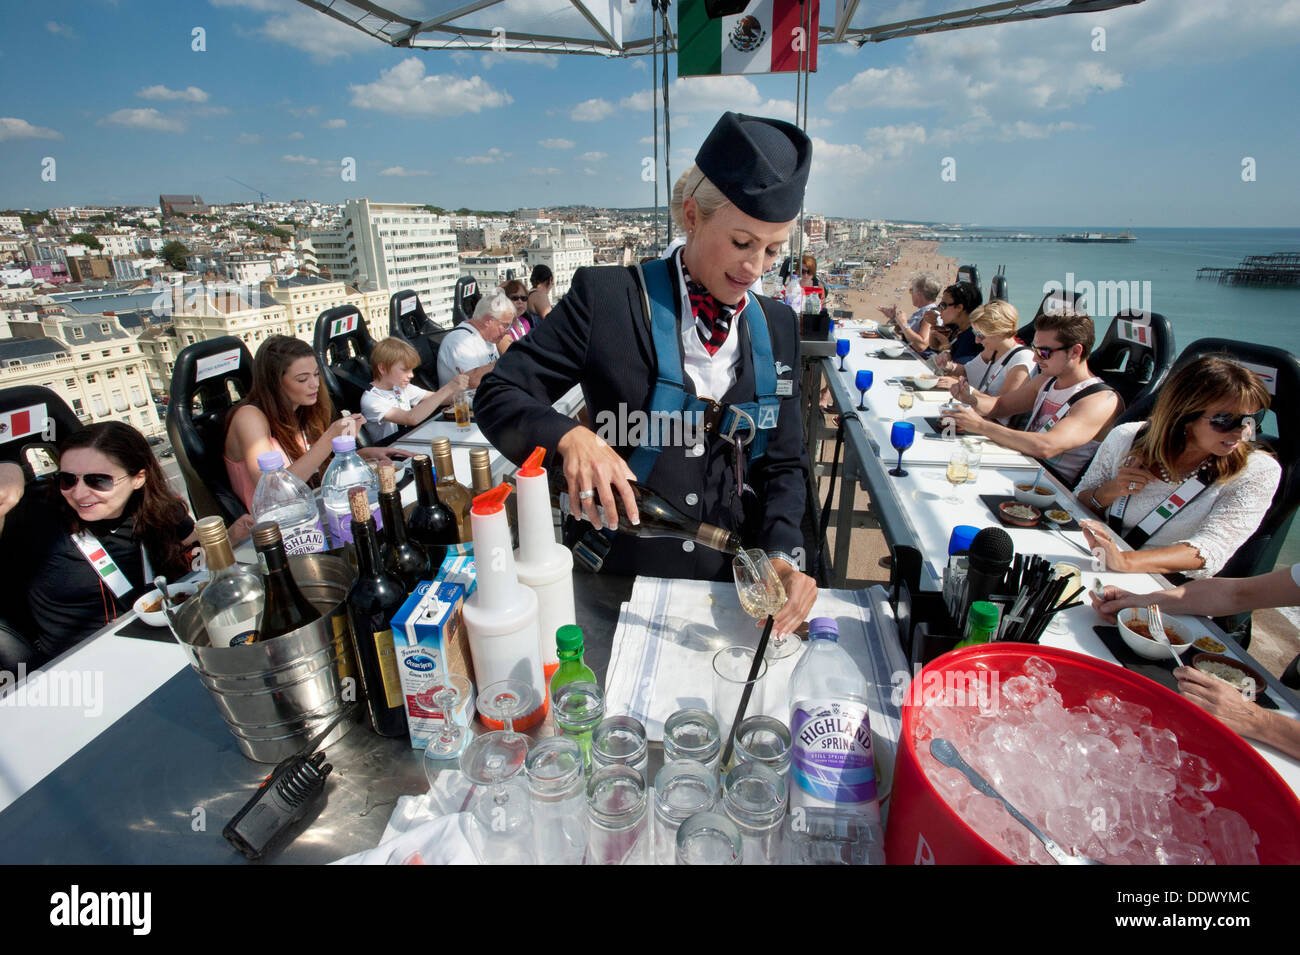 A British Airways Ambassador Stewardess Purser serving drinks to 22 diners 100 foot high in the sky above Brighton and Hove beach on a dining table in the sky. Stock Photo